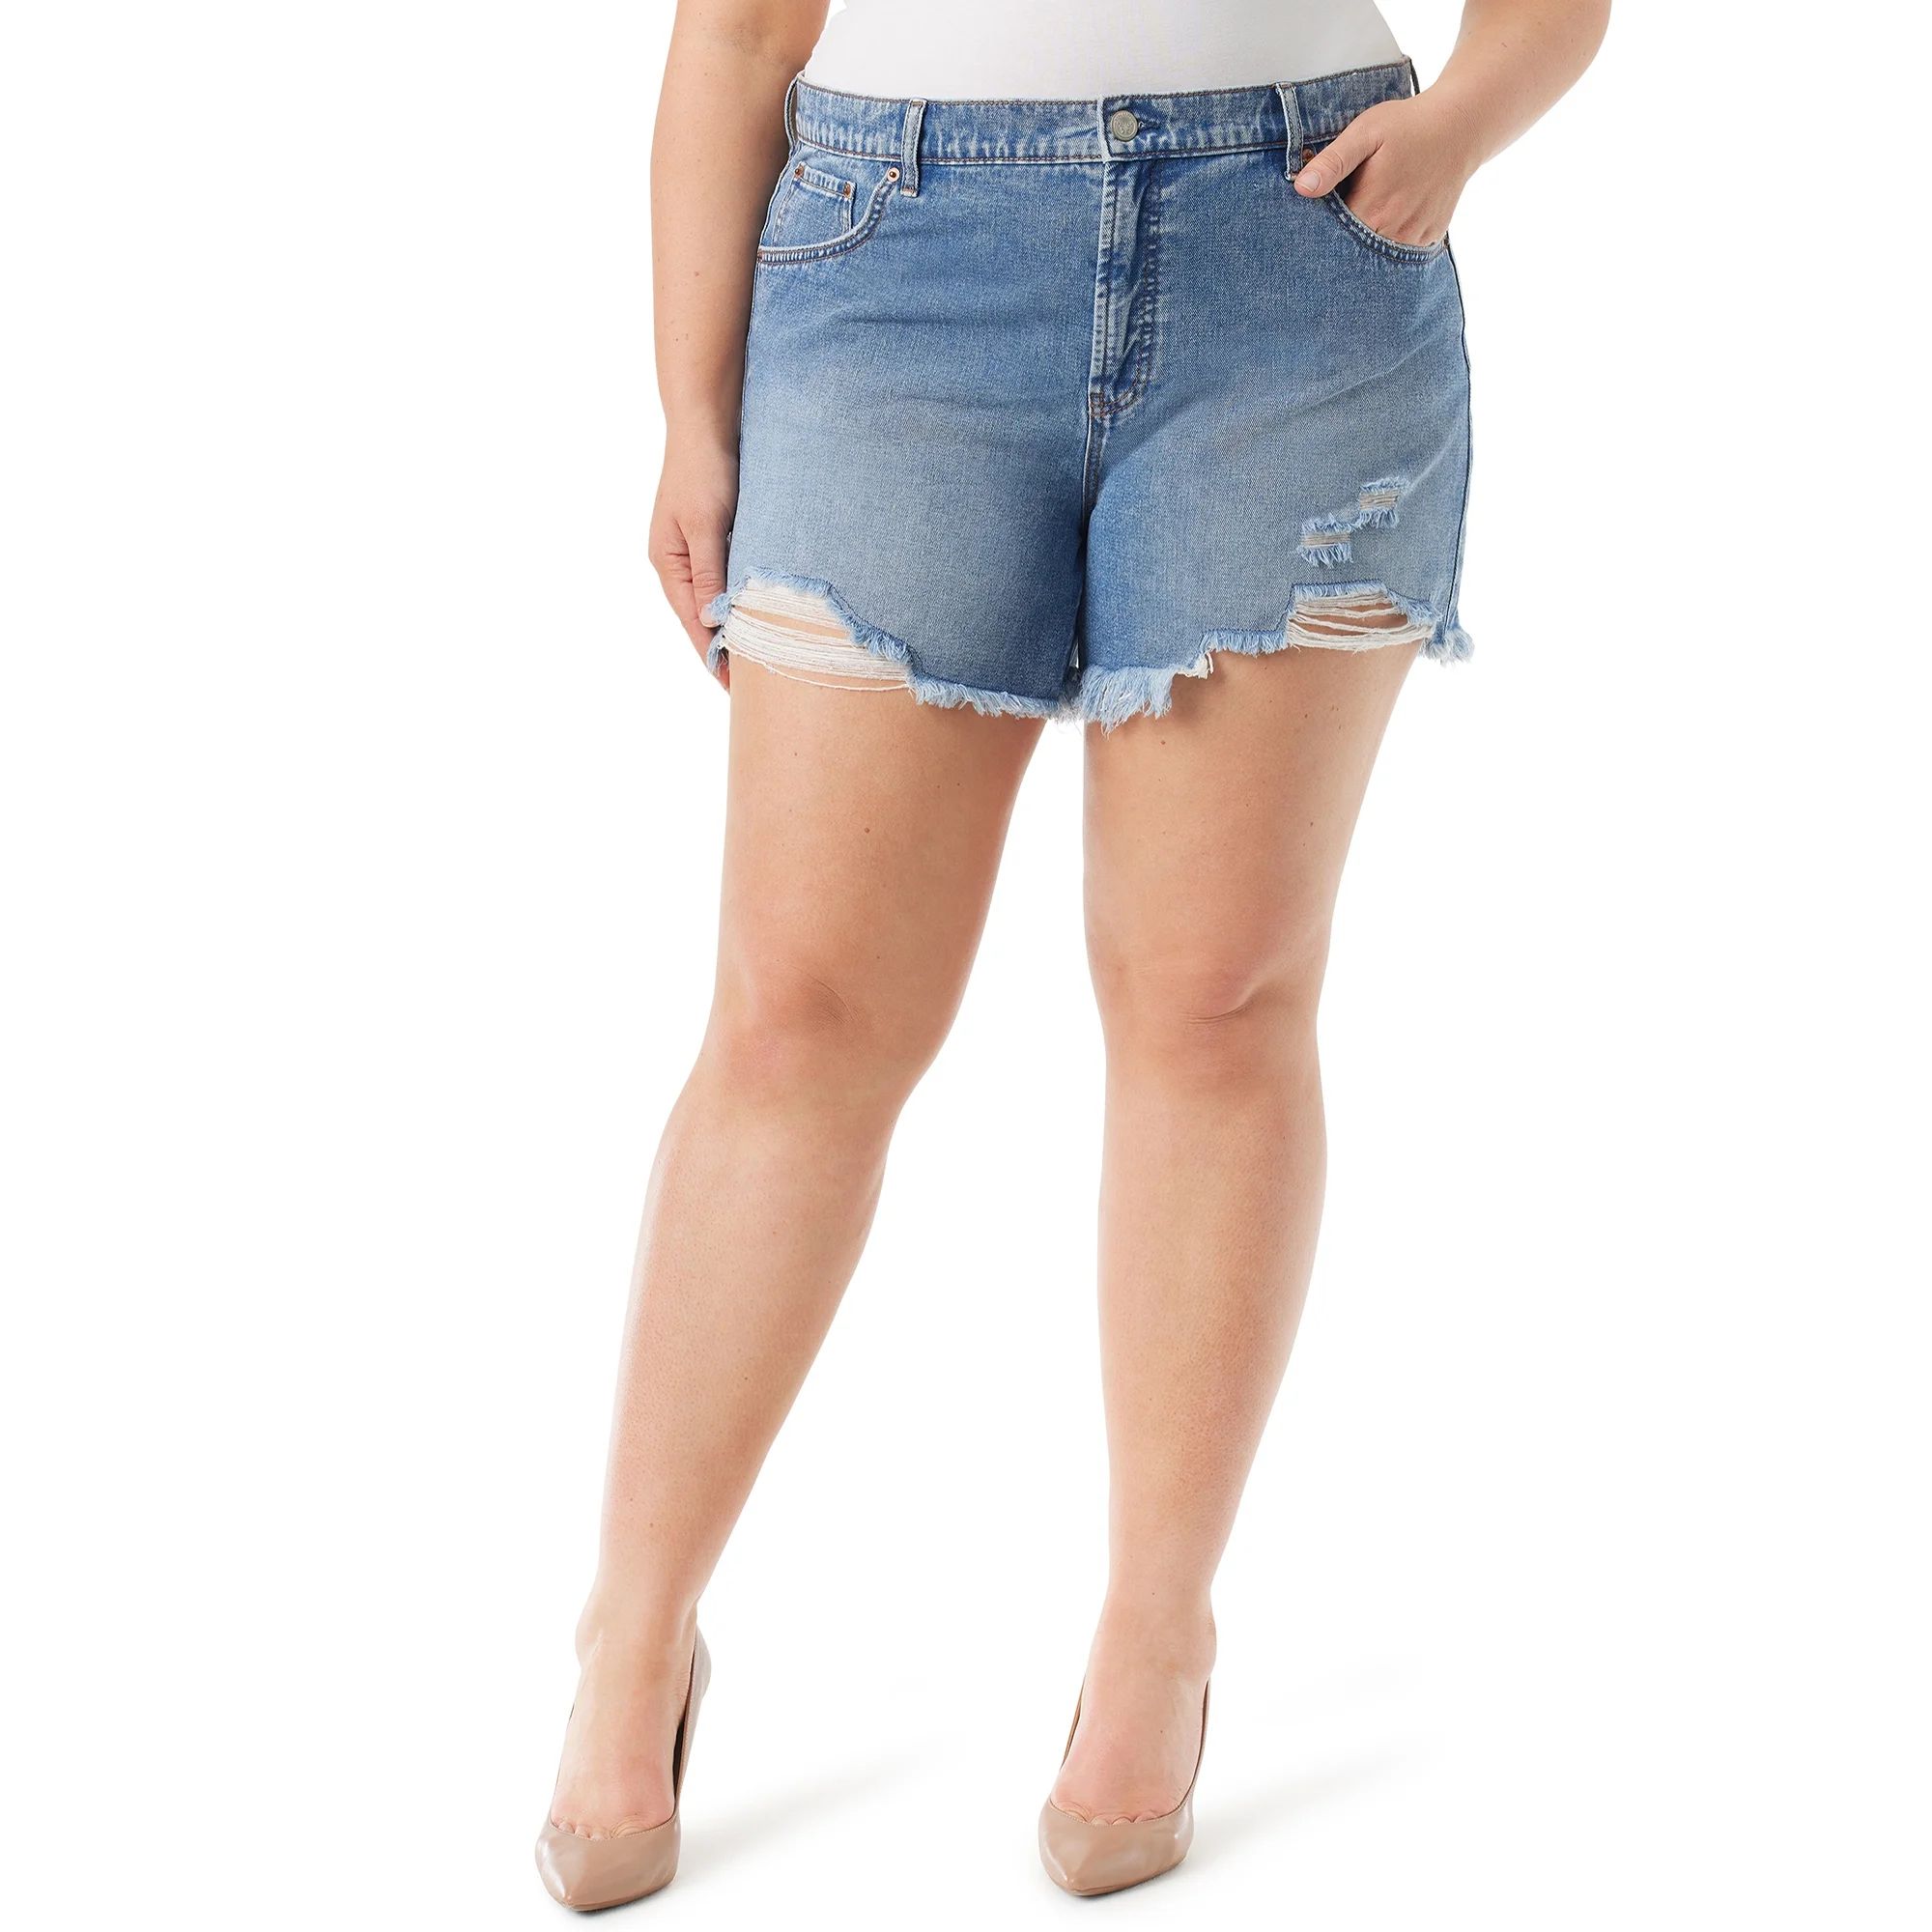 Jessica Simpson Women's and Women's Plus Beloved High Waisted Shorts, Sizes 2-26W | Walmart (US)